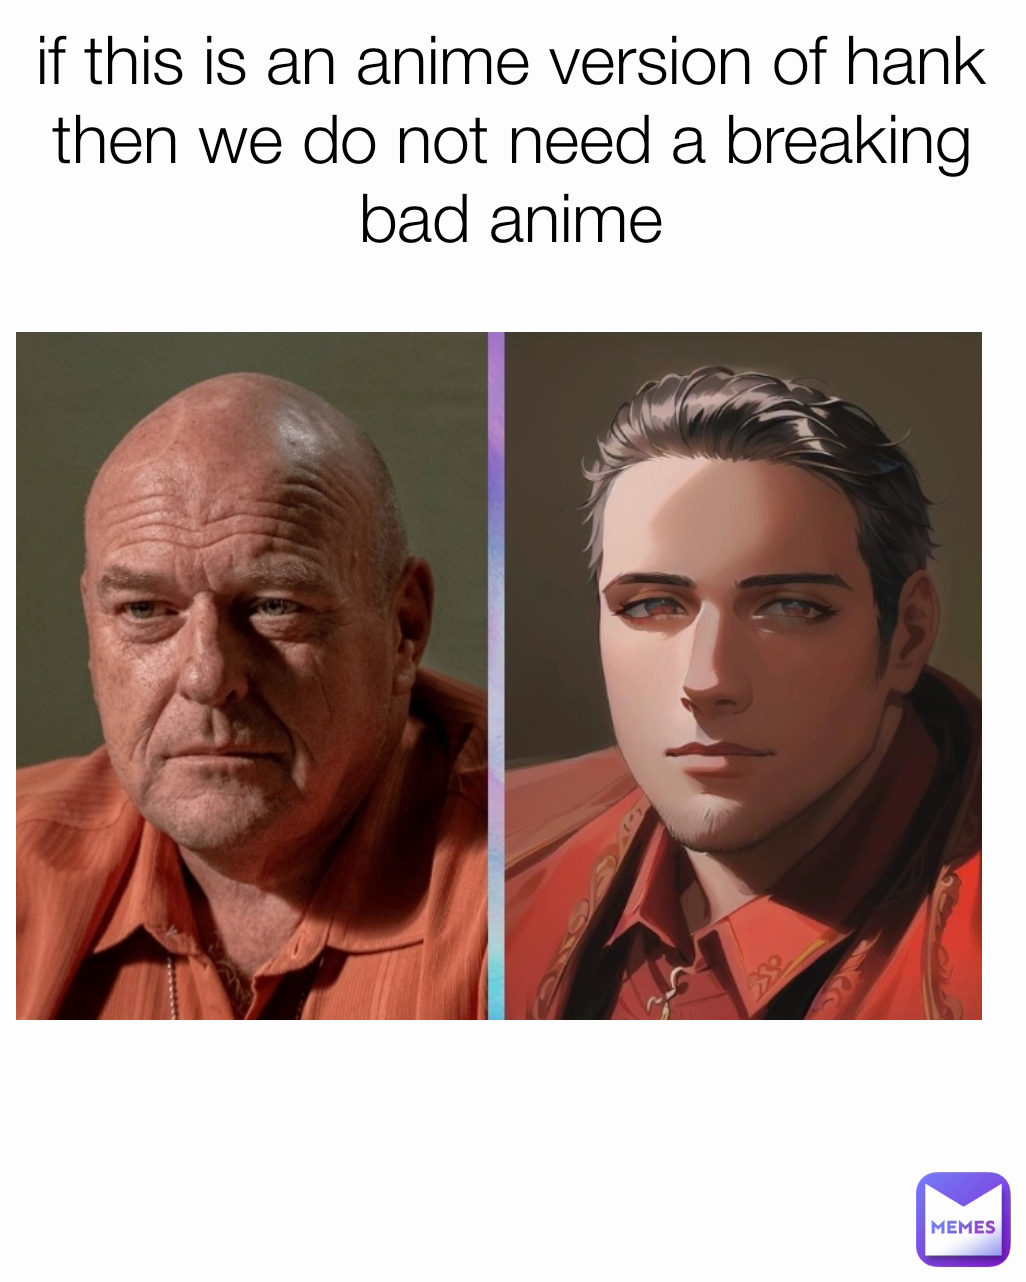 The Friend Who's Actually a Lesbian, Anime Memes Replaced With Breaking Bad  / Mikeposting